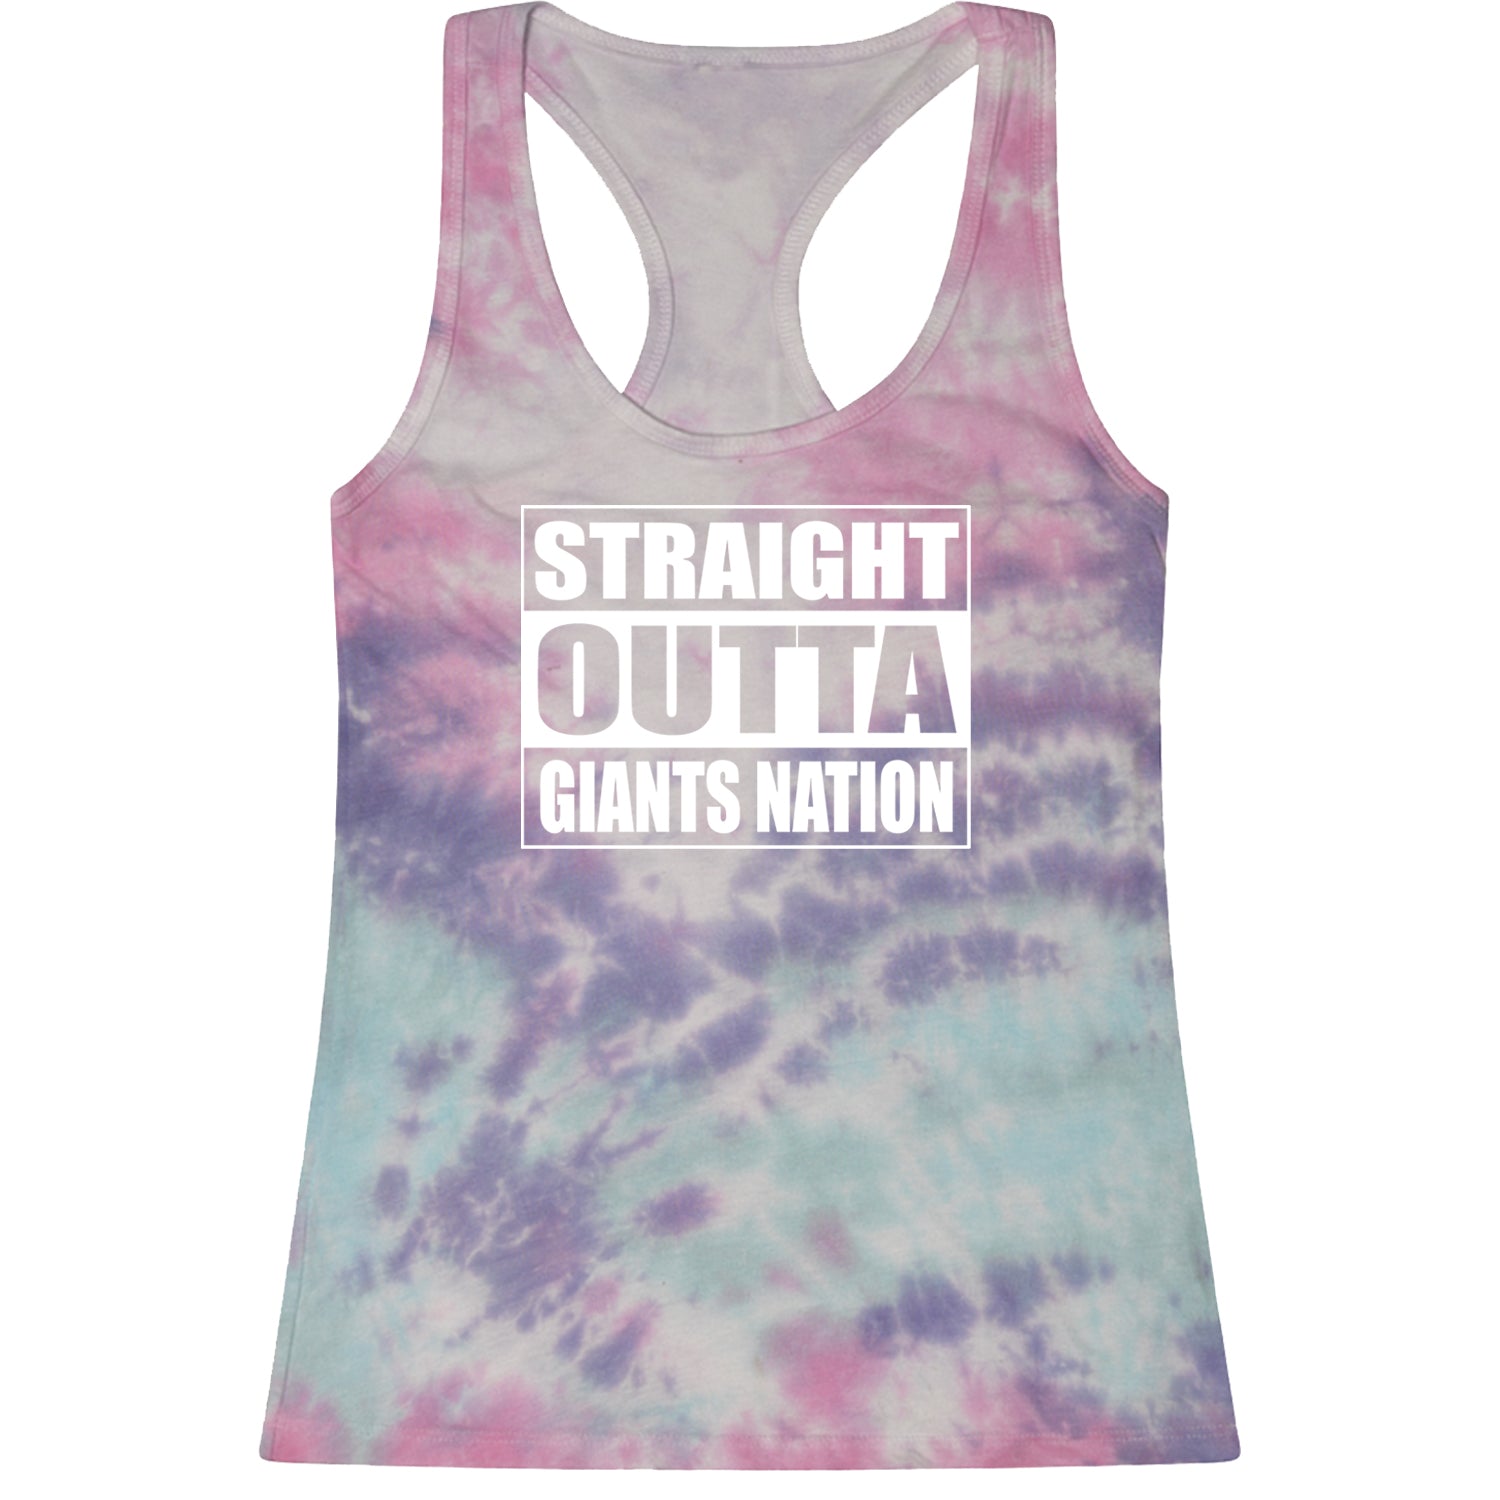 Straight Outta Giants Nation Racerback Tank Top for Women bleed, blue, football, giants, new, ny, york by Expression Tees